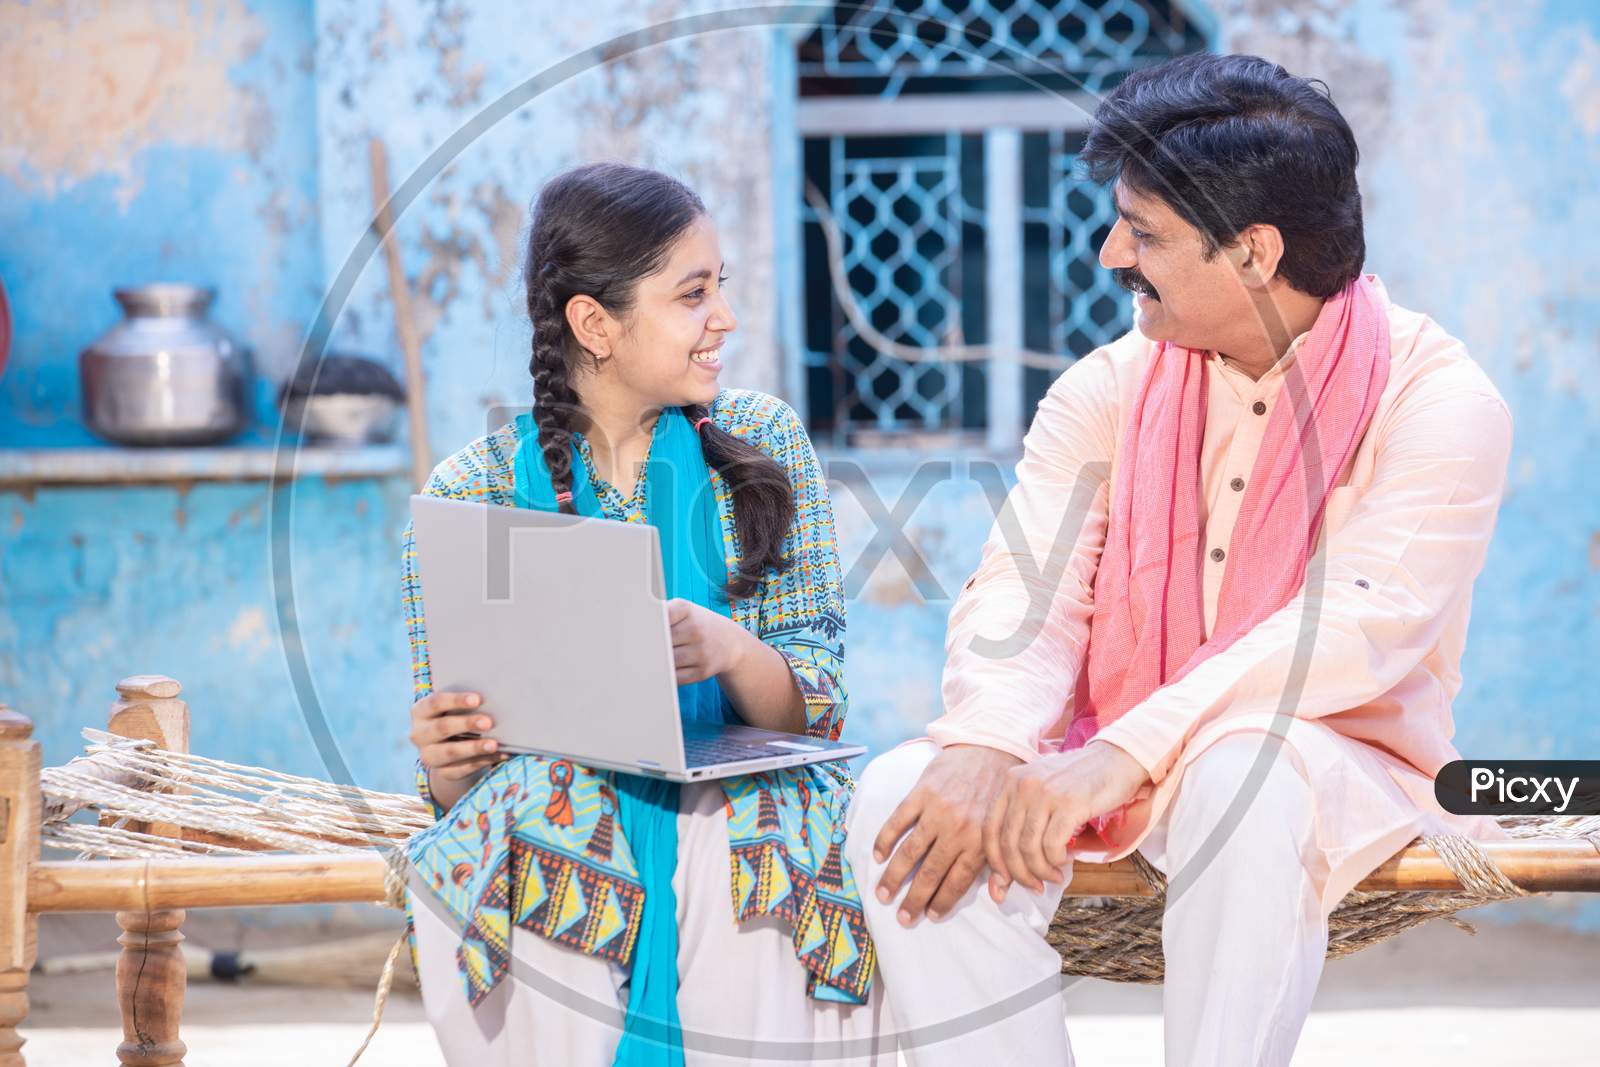 Cheerful Indian Father And Young Daughter Using Laptop Looking At Each Other While Sitting On Traditional Wooden Bed Outside Their House, Happy Rural Family, Web Surfing, Technology Concept.